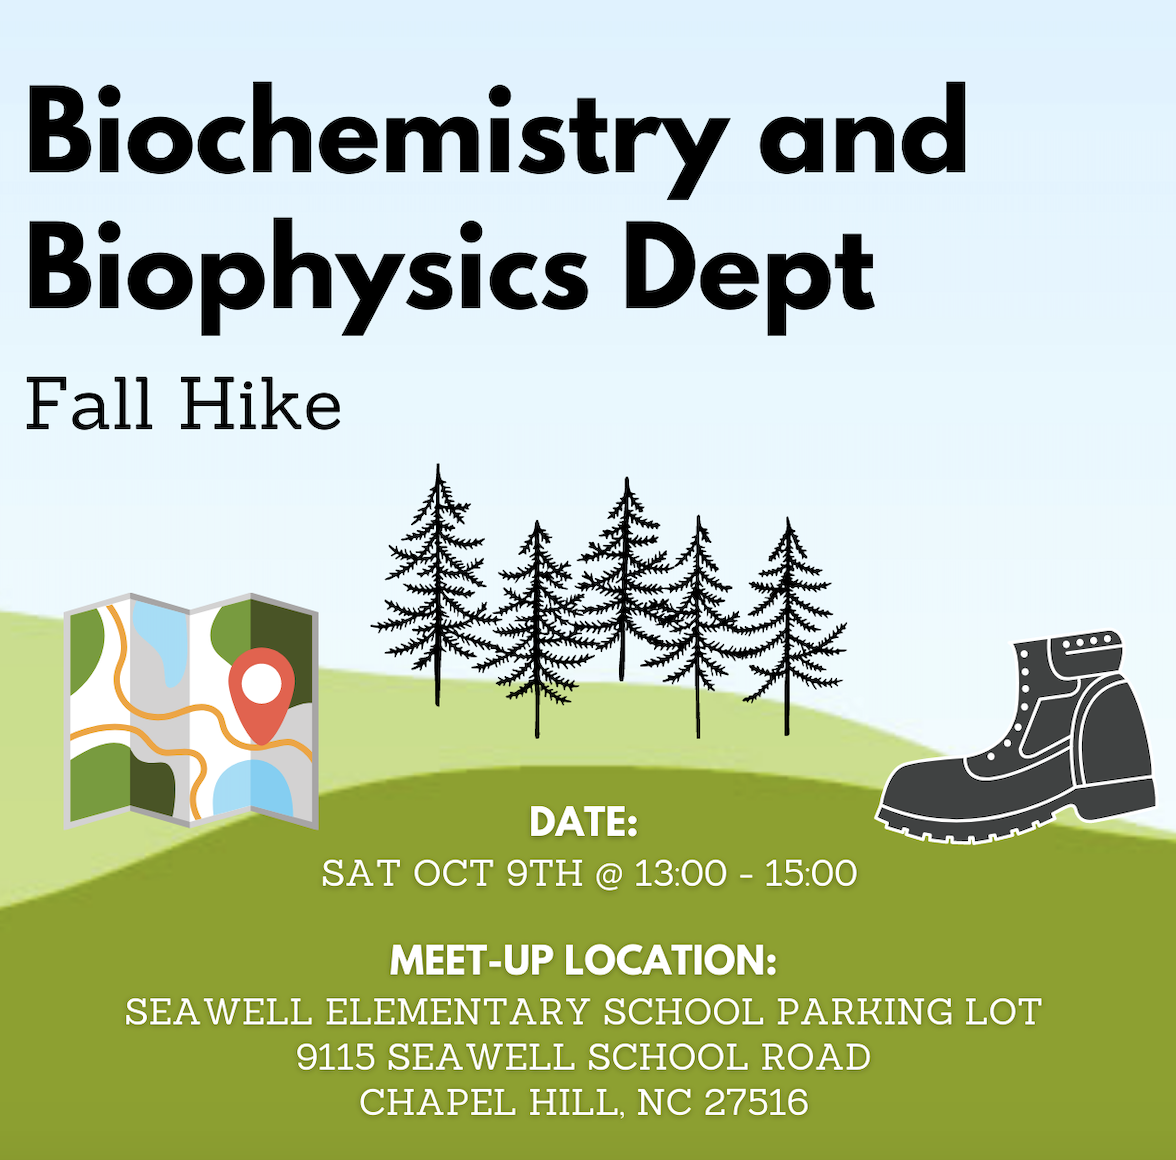 BCBP Fall Hike 2021 text Biochemistry and Biophysics Dept Fall Hike" with date and location information